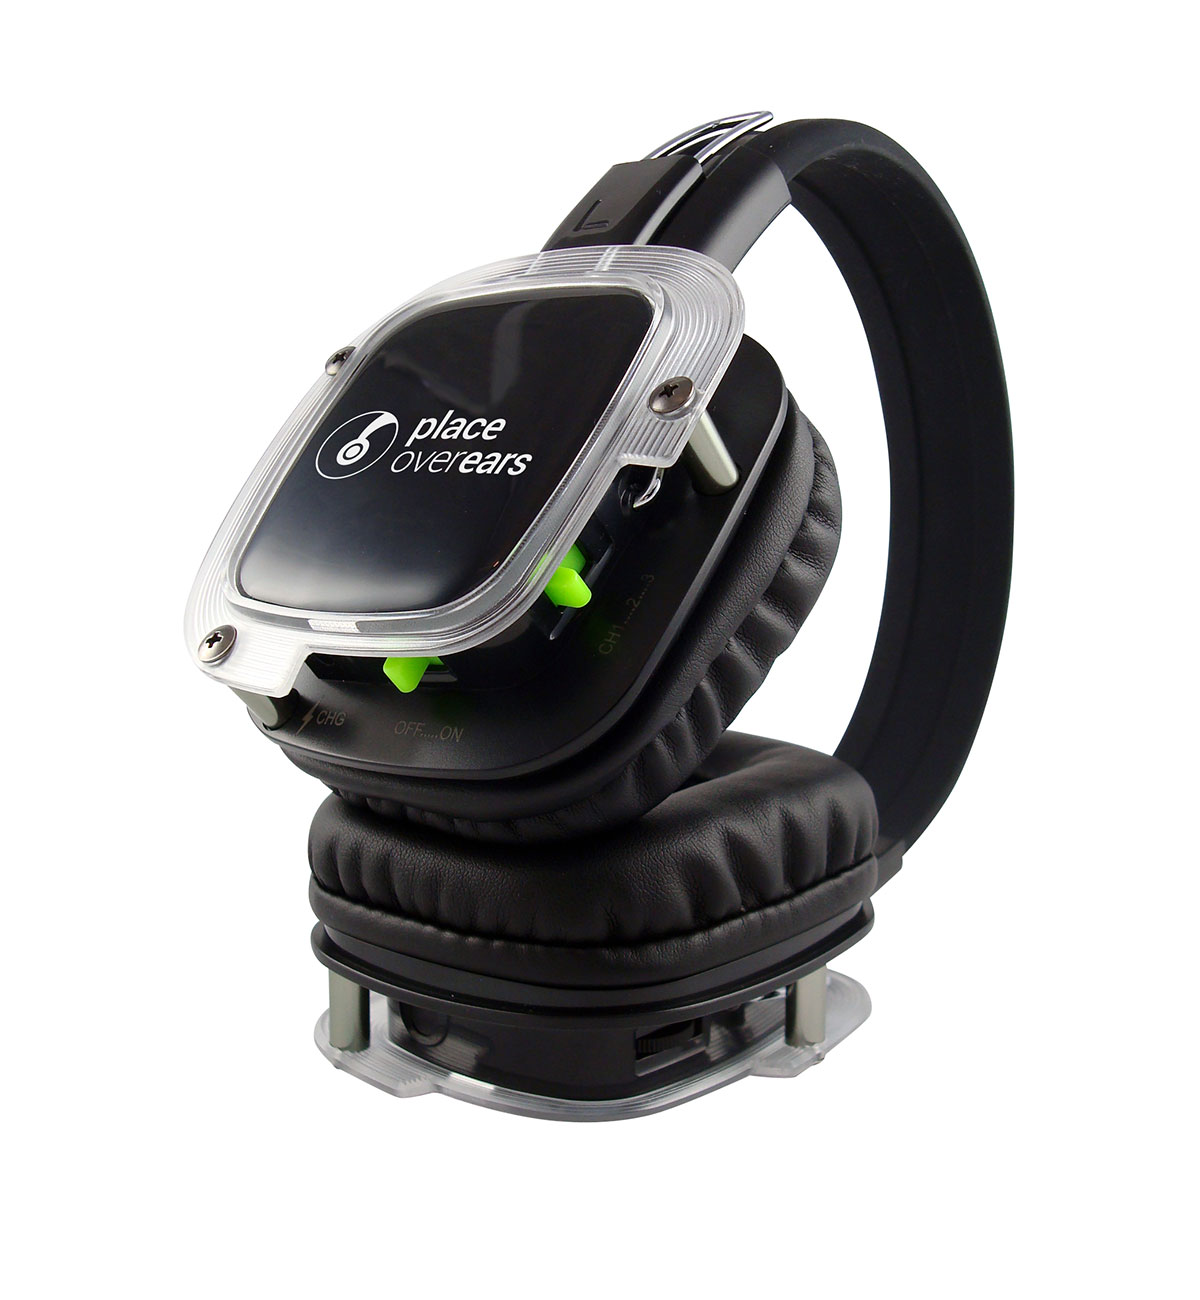 An image of Place Over Ears' Ph020 Silent disco headphones with LED light-up effect and 3 channel audio capability